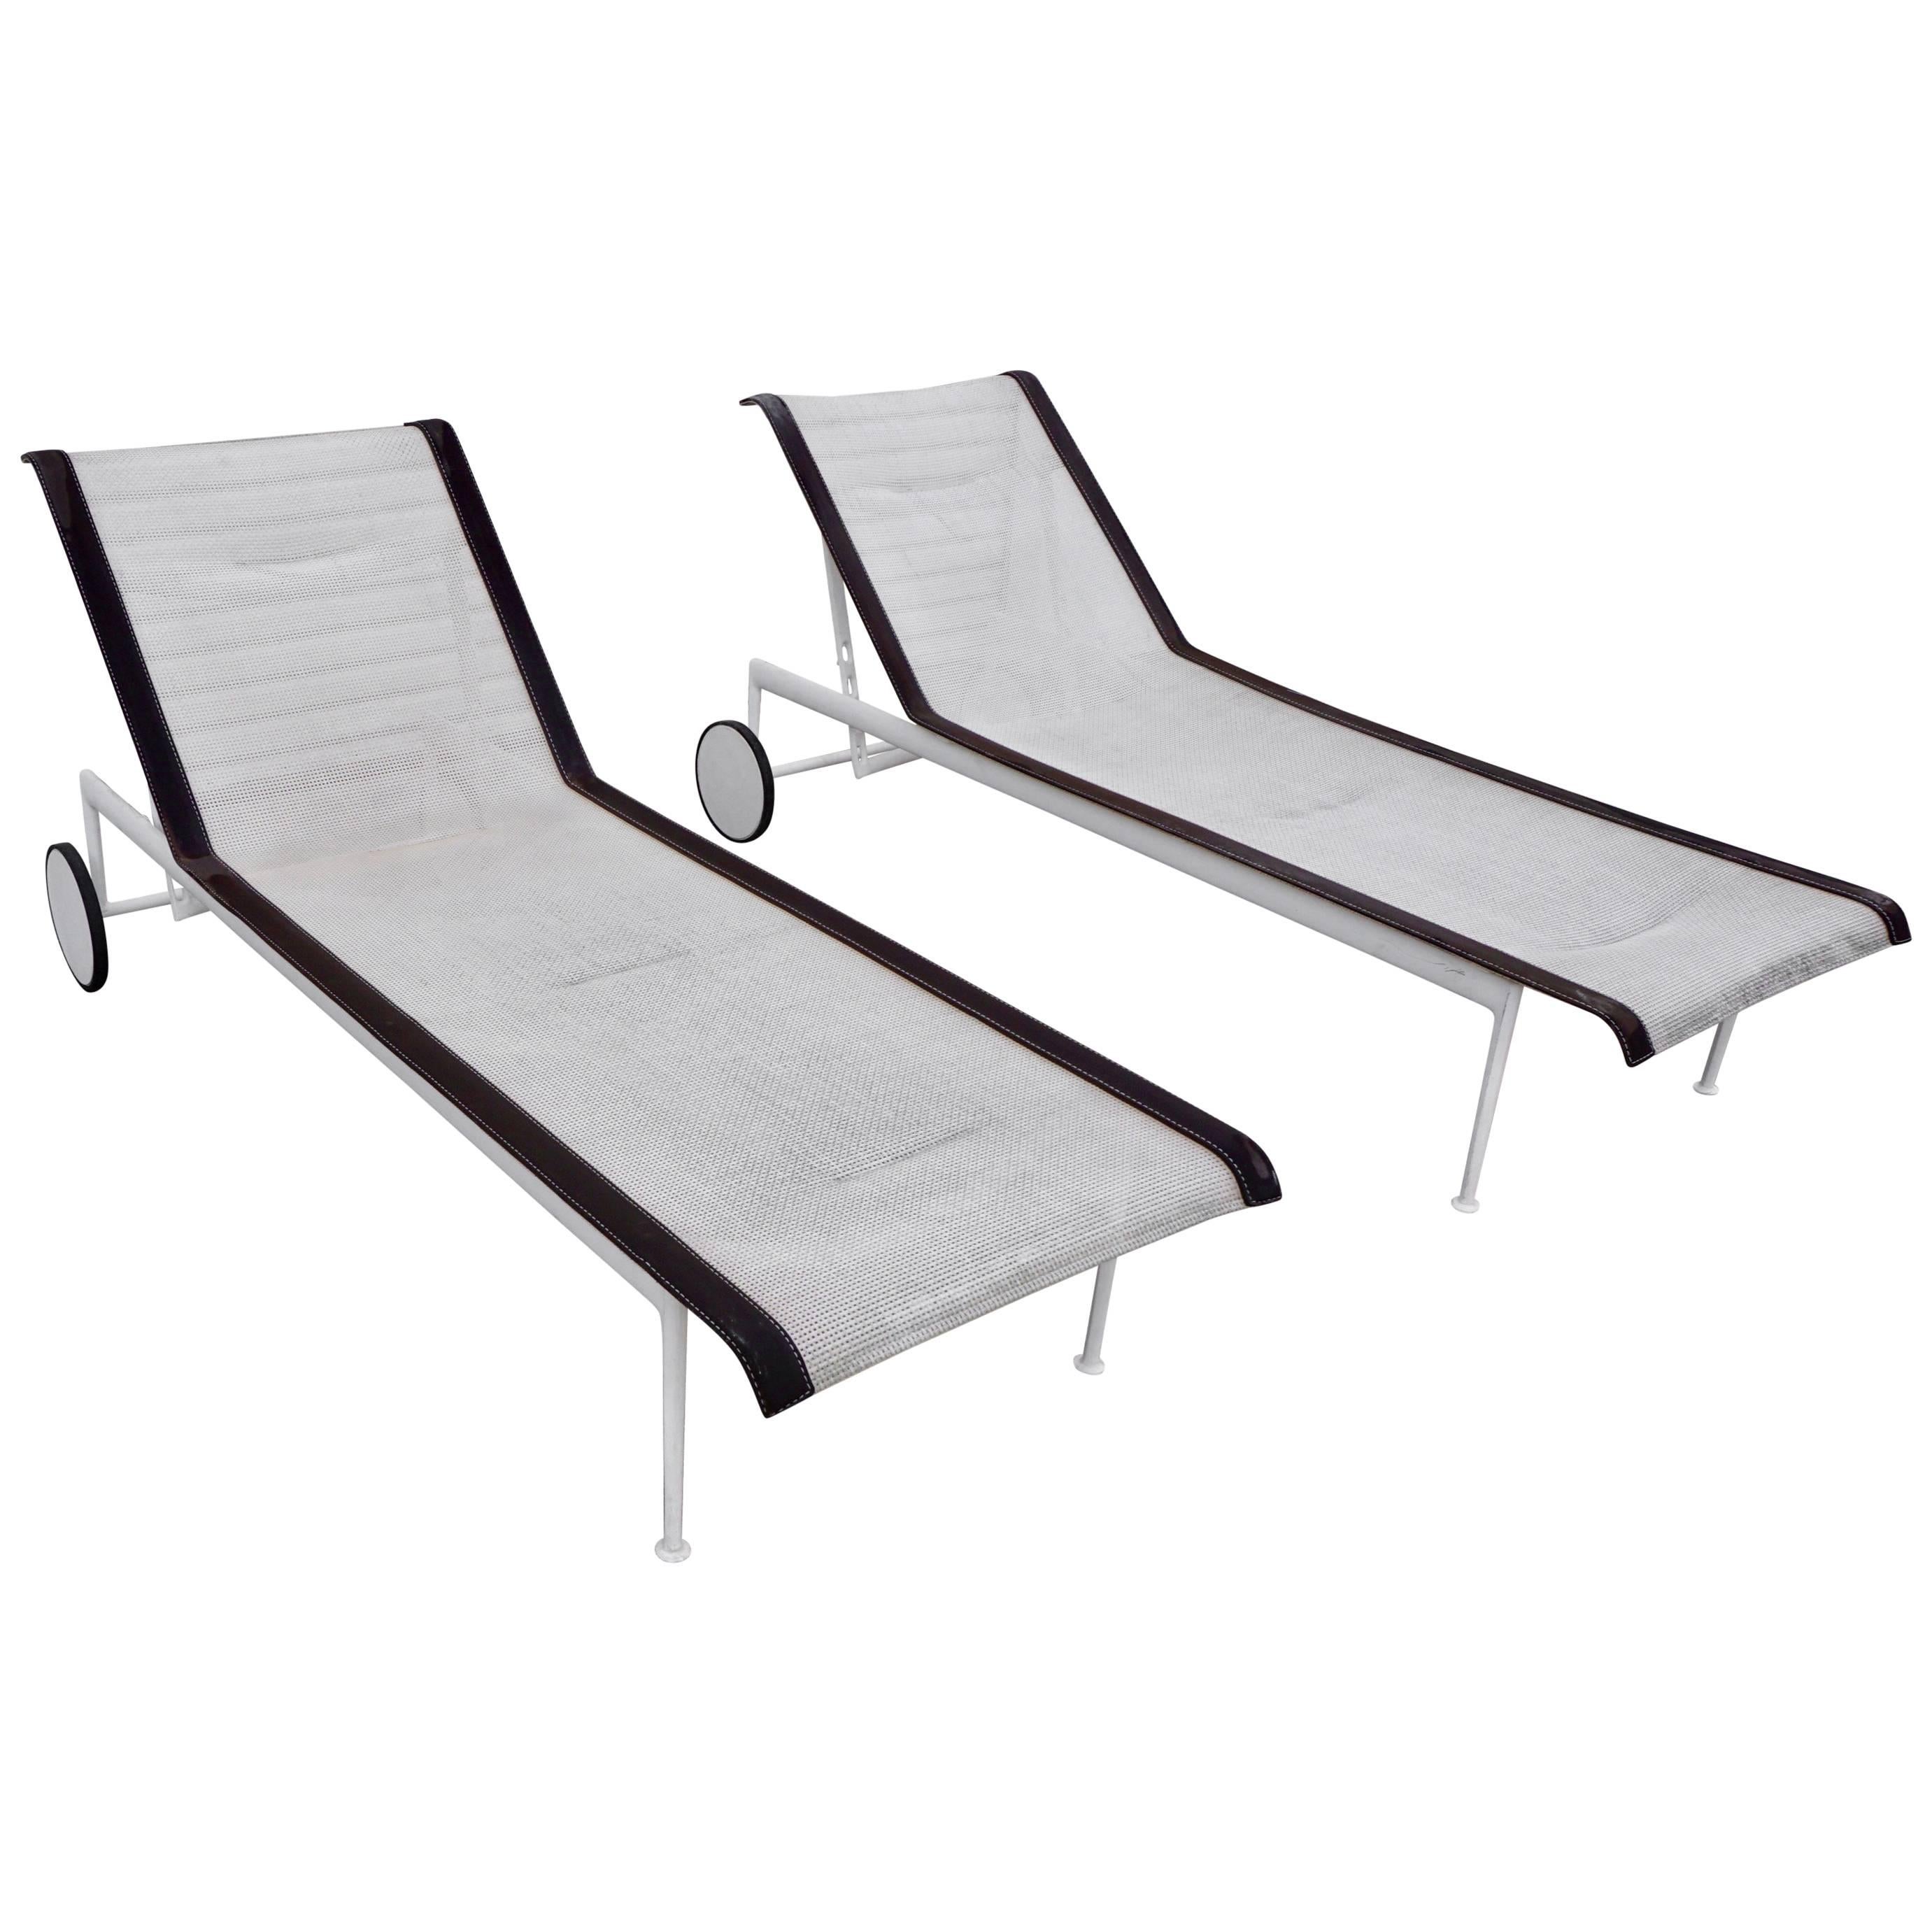 Pair of Richard Schultz Chaise Lounges for Knoll